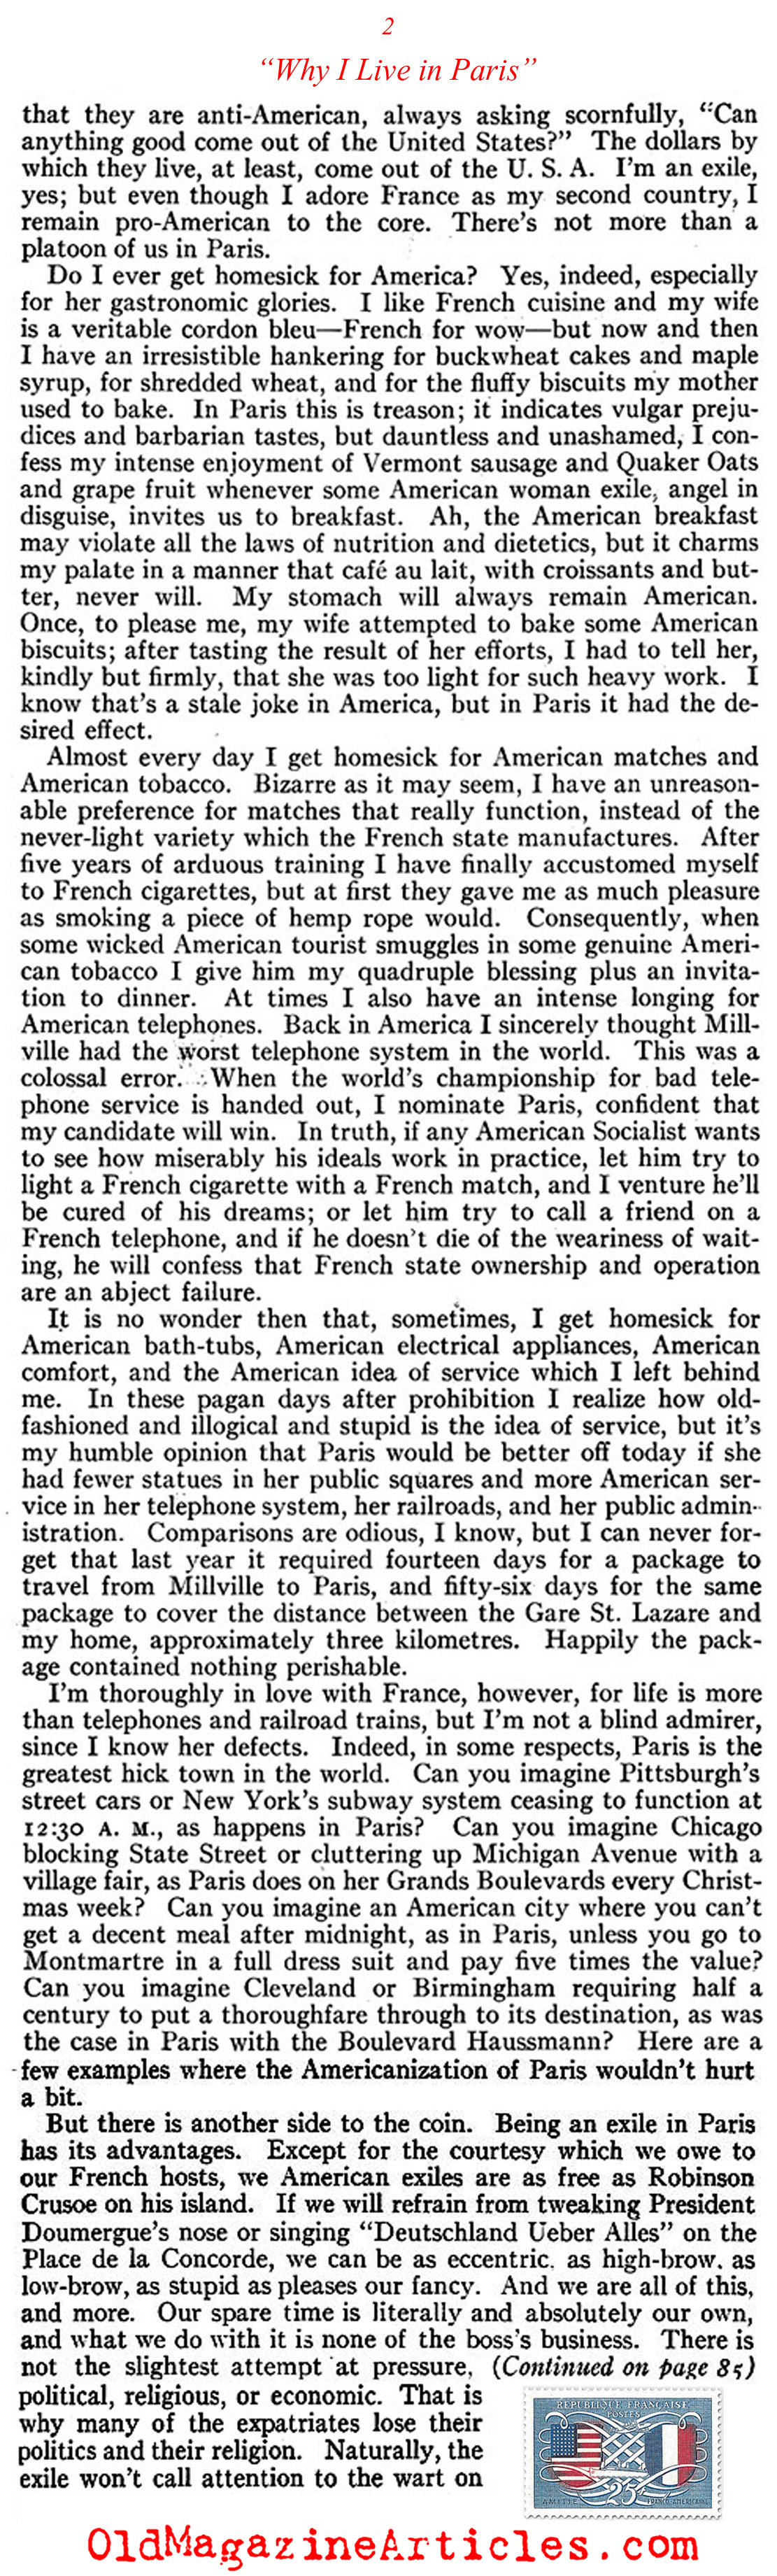 ''Why I Live in Paris'' by a Former American Soldier (American Legion Monthly, 1927)